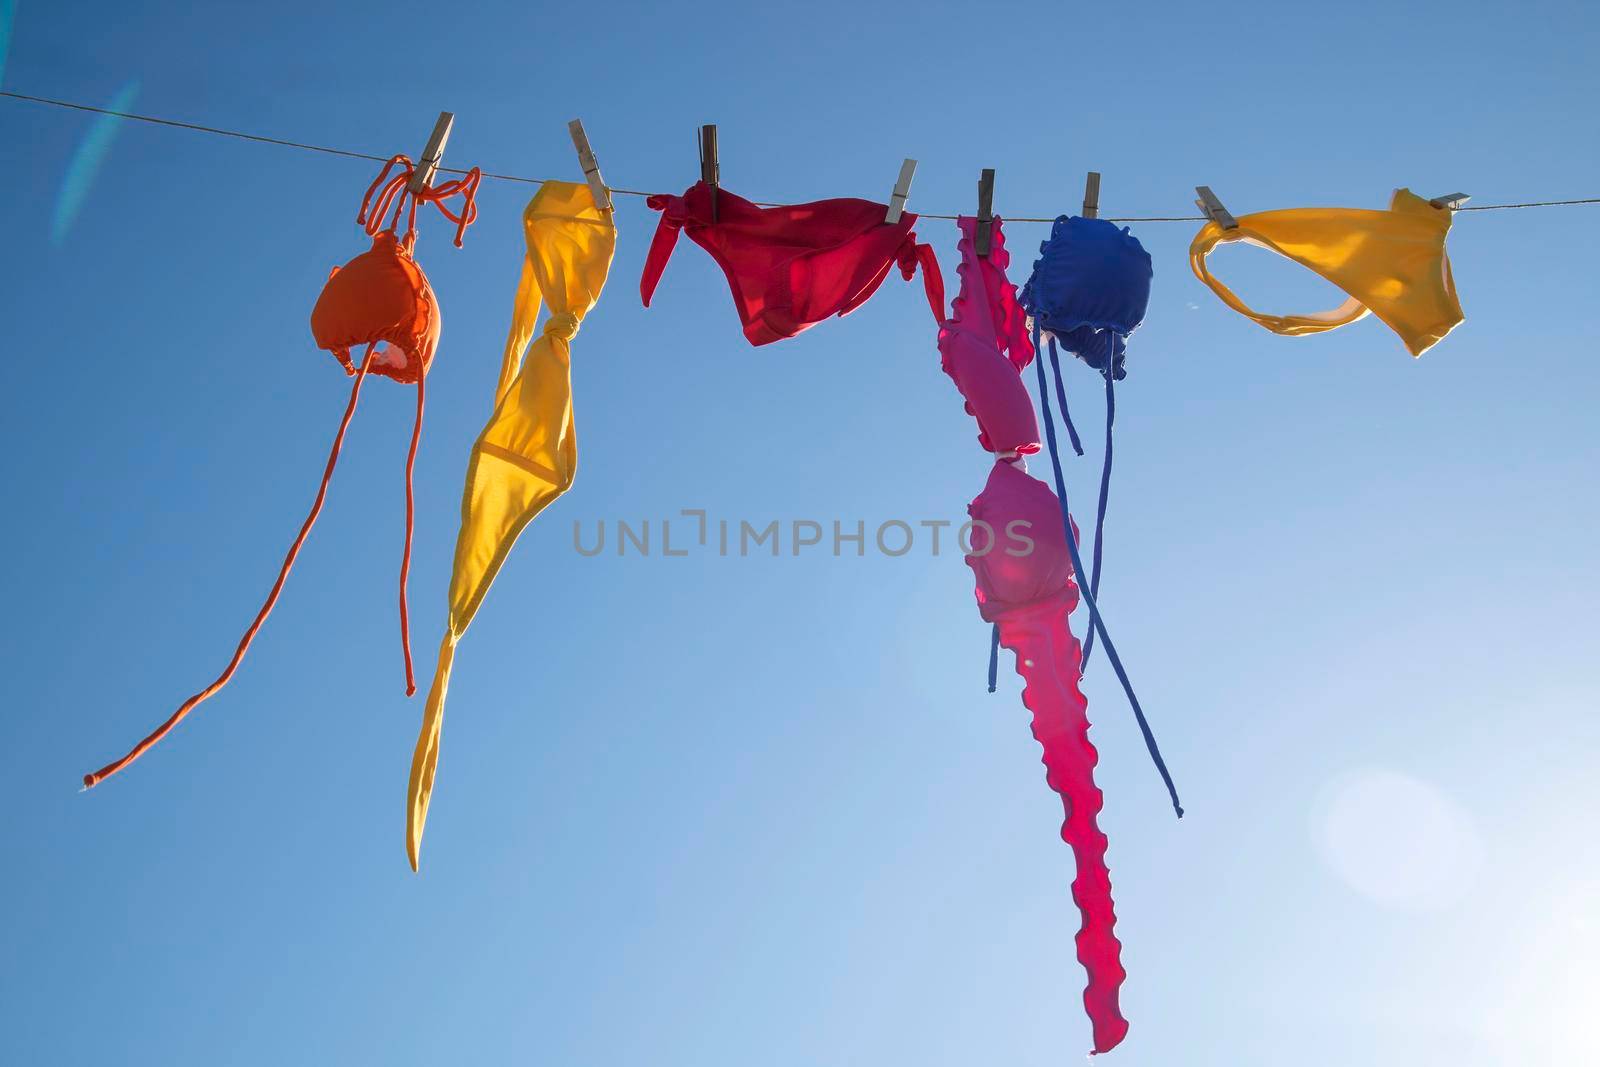 Swimwear of various colors lying in the sun  by fotografiche.eu